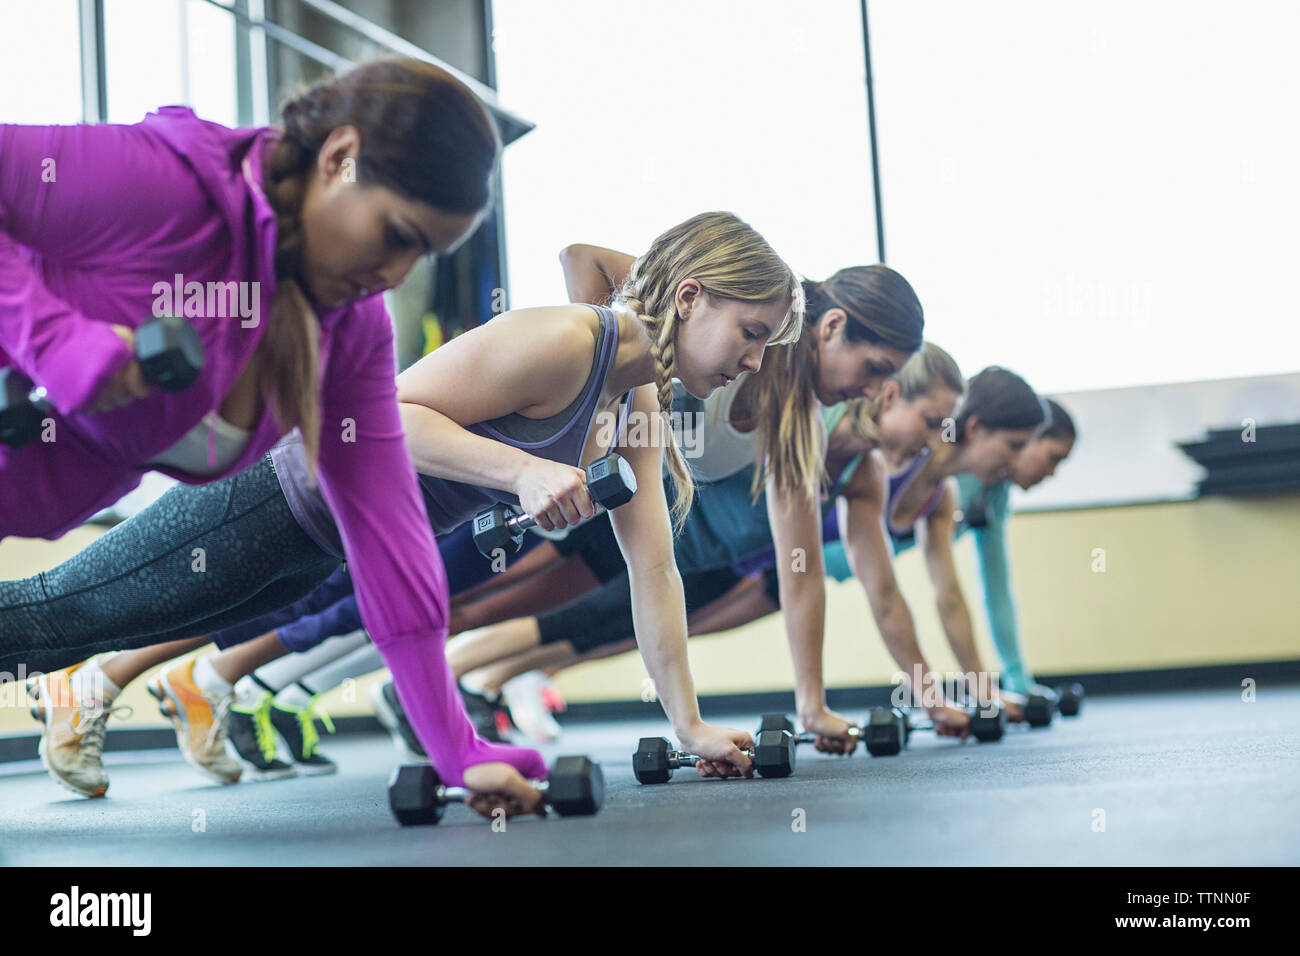 Women doing push-ups with dumbbells at gym Stock Photo